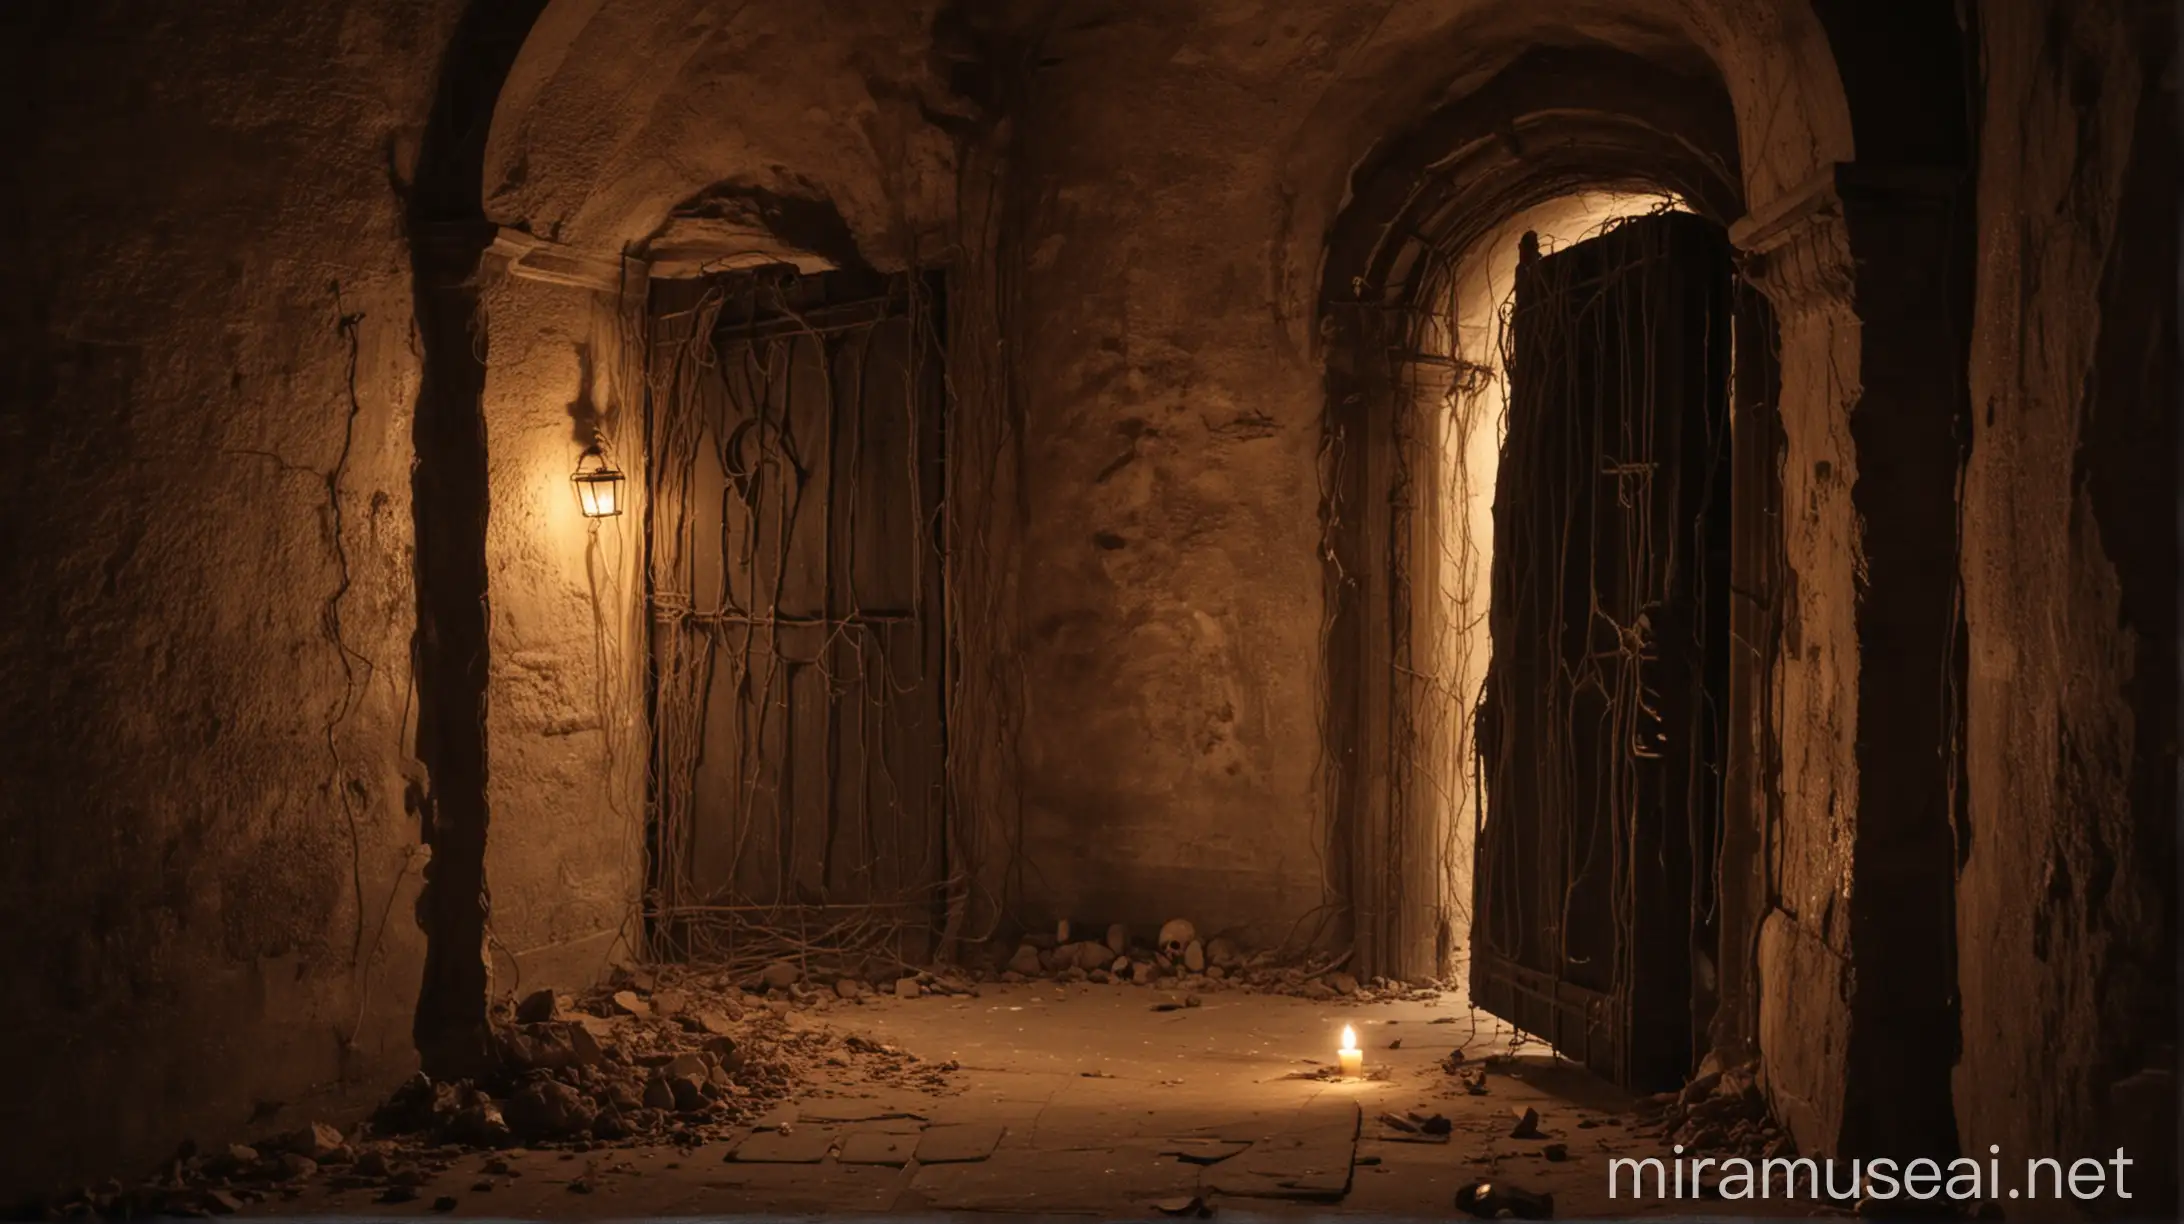 Mysterious Dungeon Entrance with Candlelight and Cobwebs